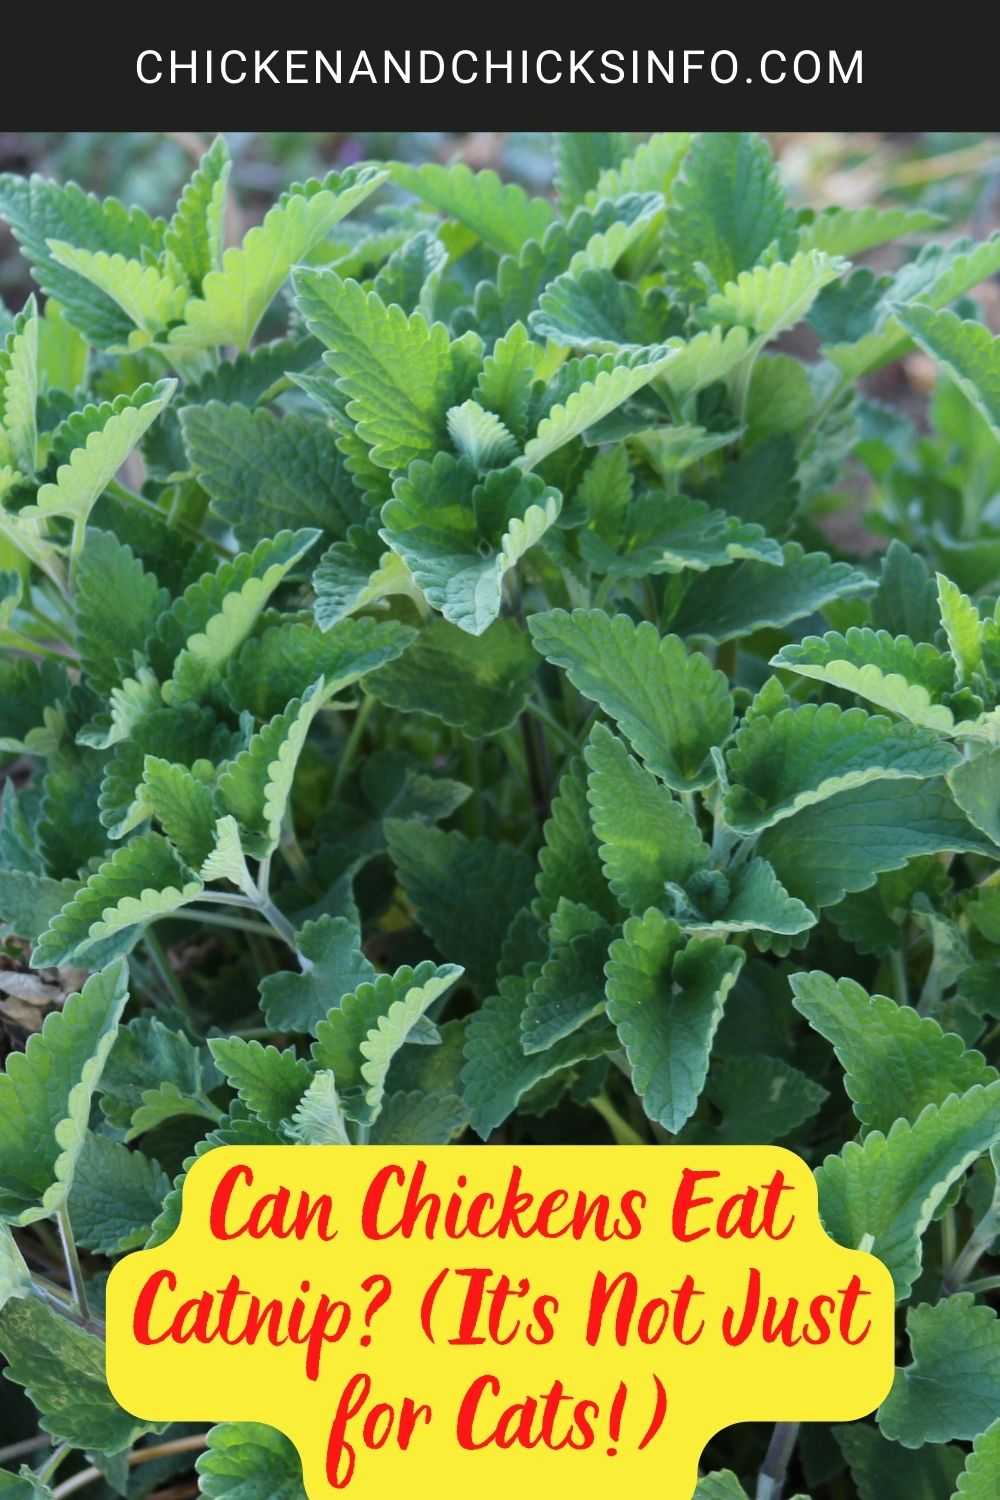 Can Chickens Eat Catnip? (It's Not Just for Cats!) poster.
